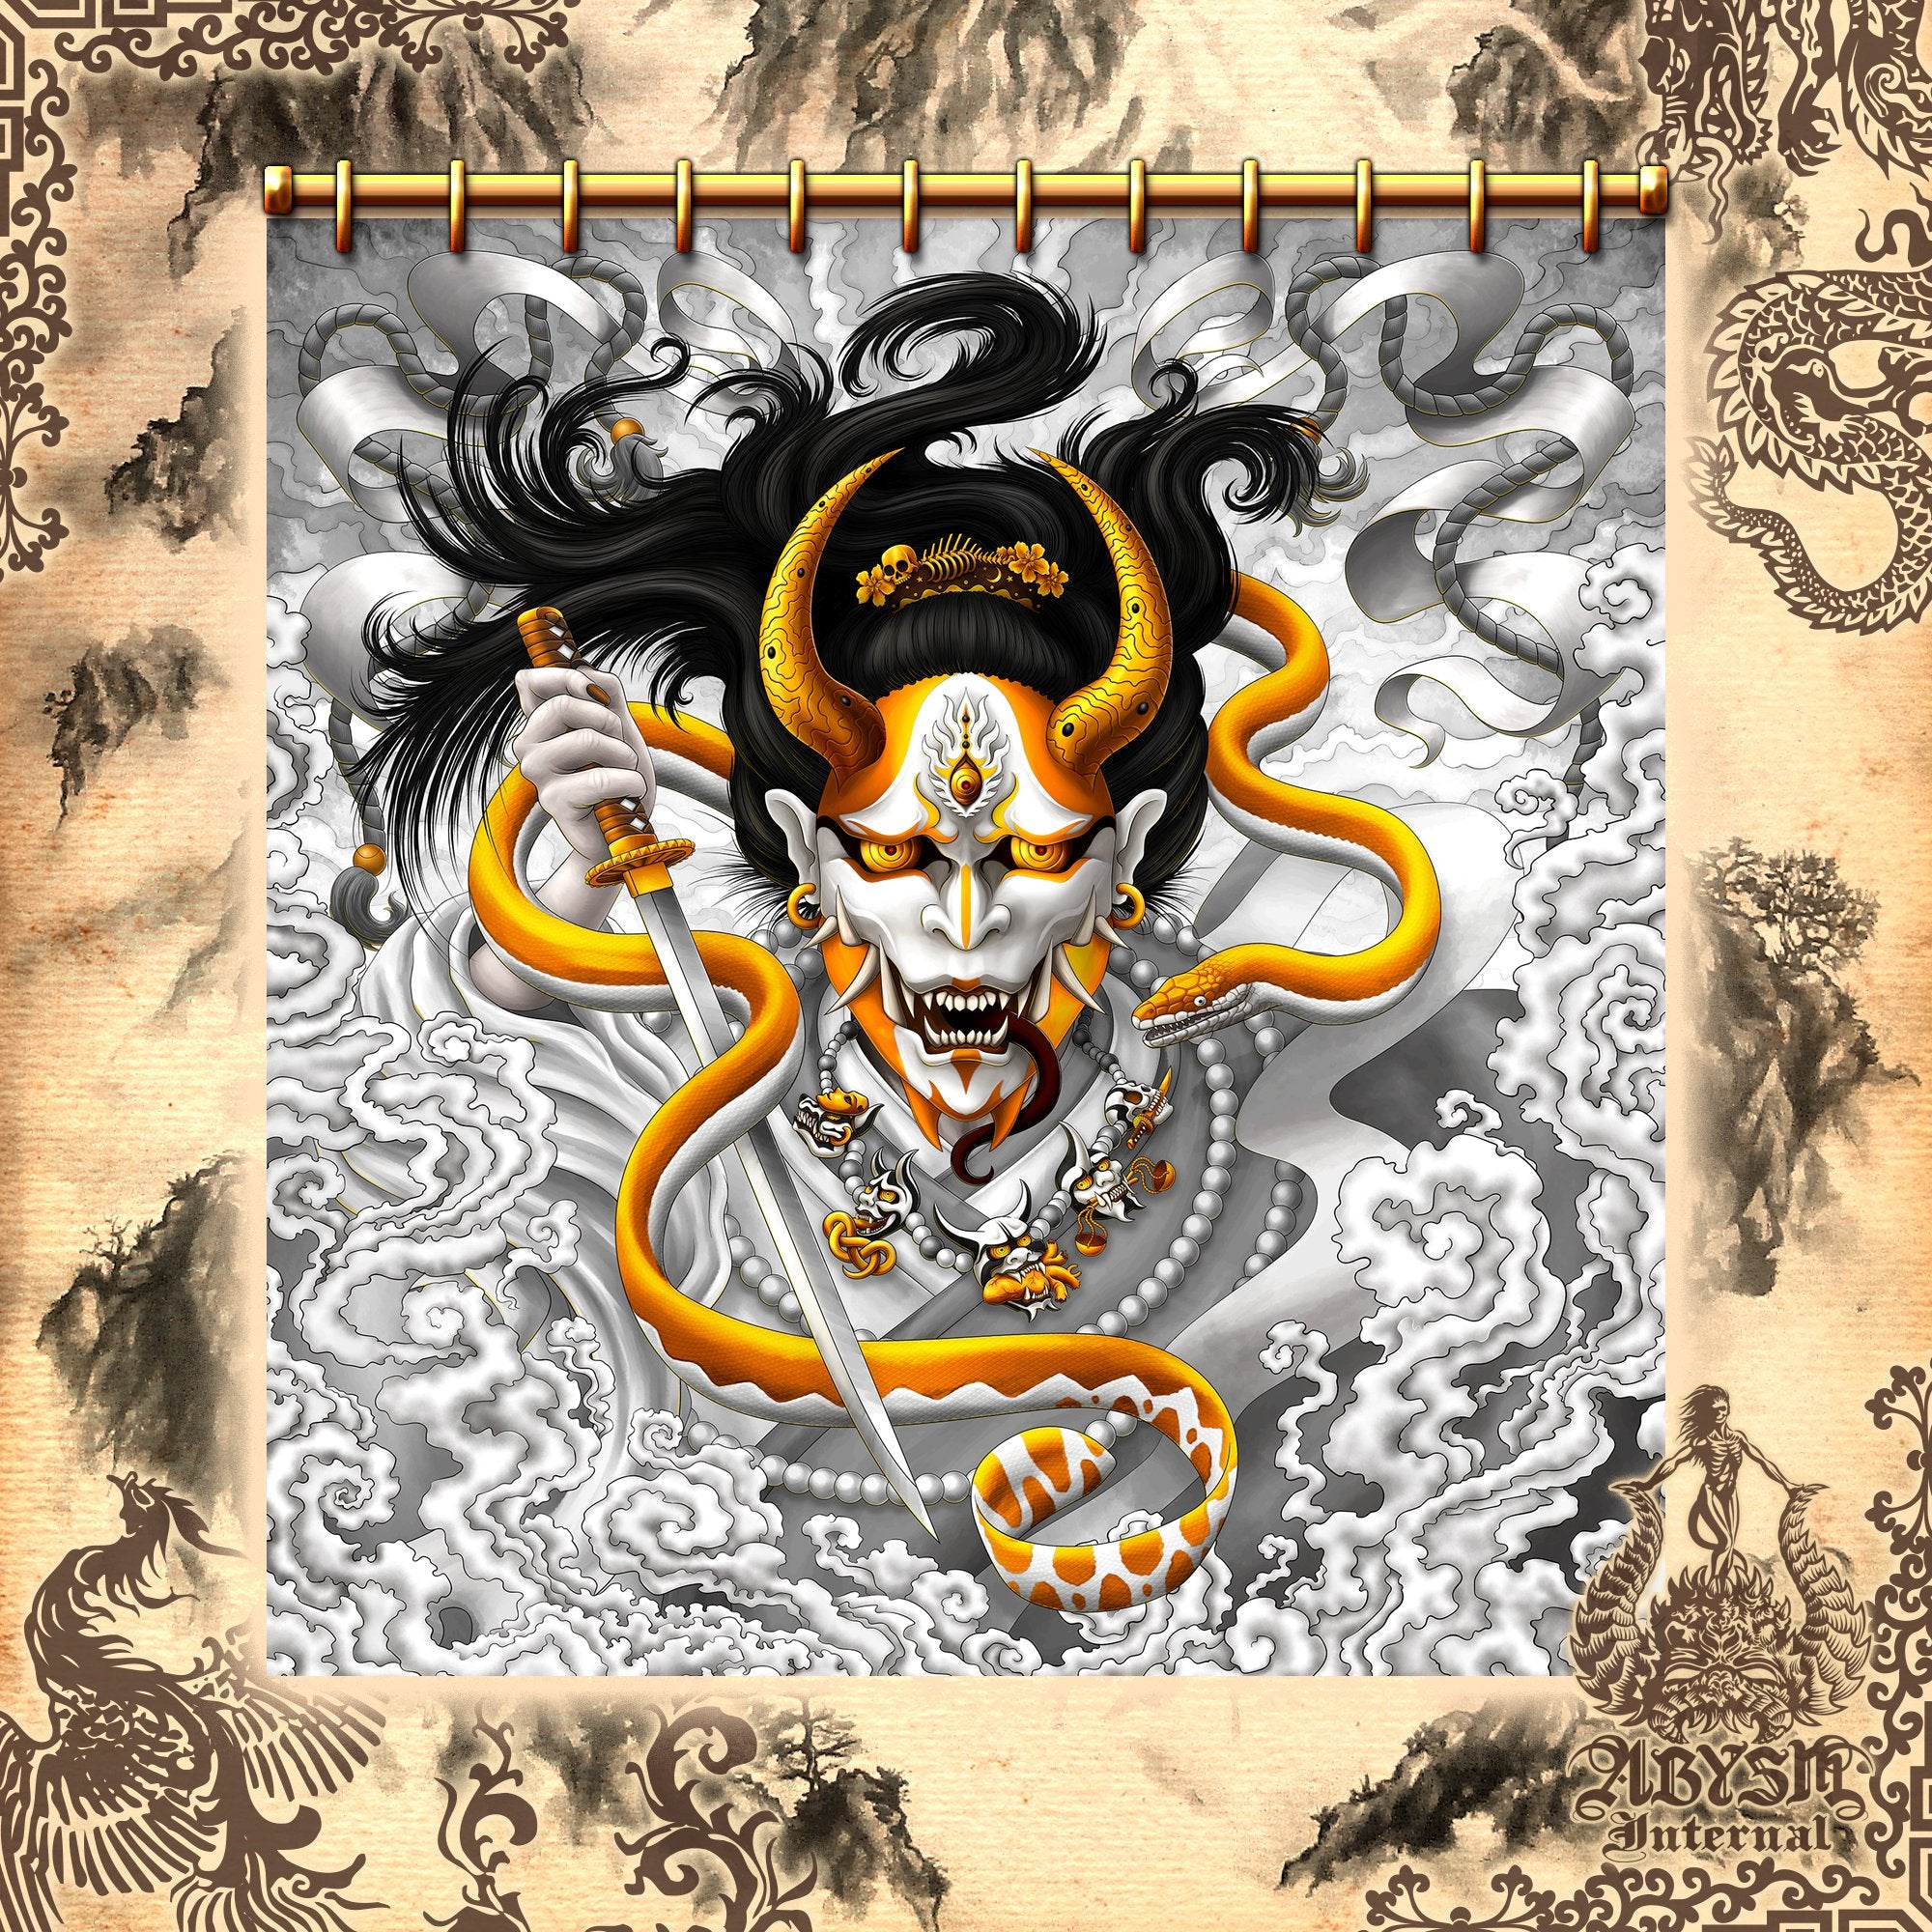 Hannya Shower Curtain, 71x74 inches, Japanese Demon and Snake, Youkai Anime and Gamer Bathroom Decor - Gold White - Abysm Internal